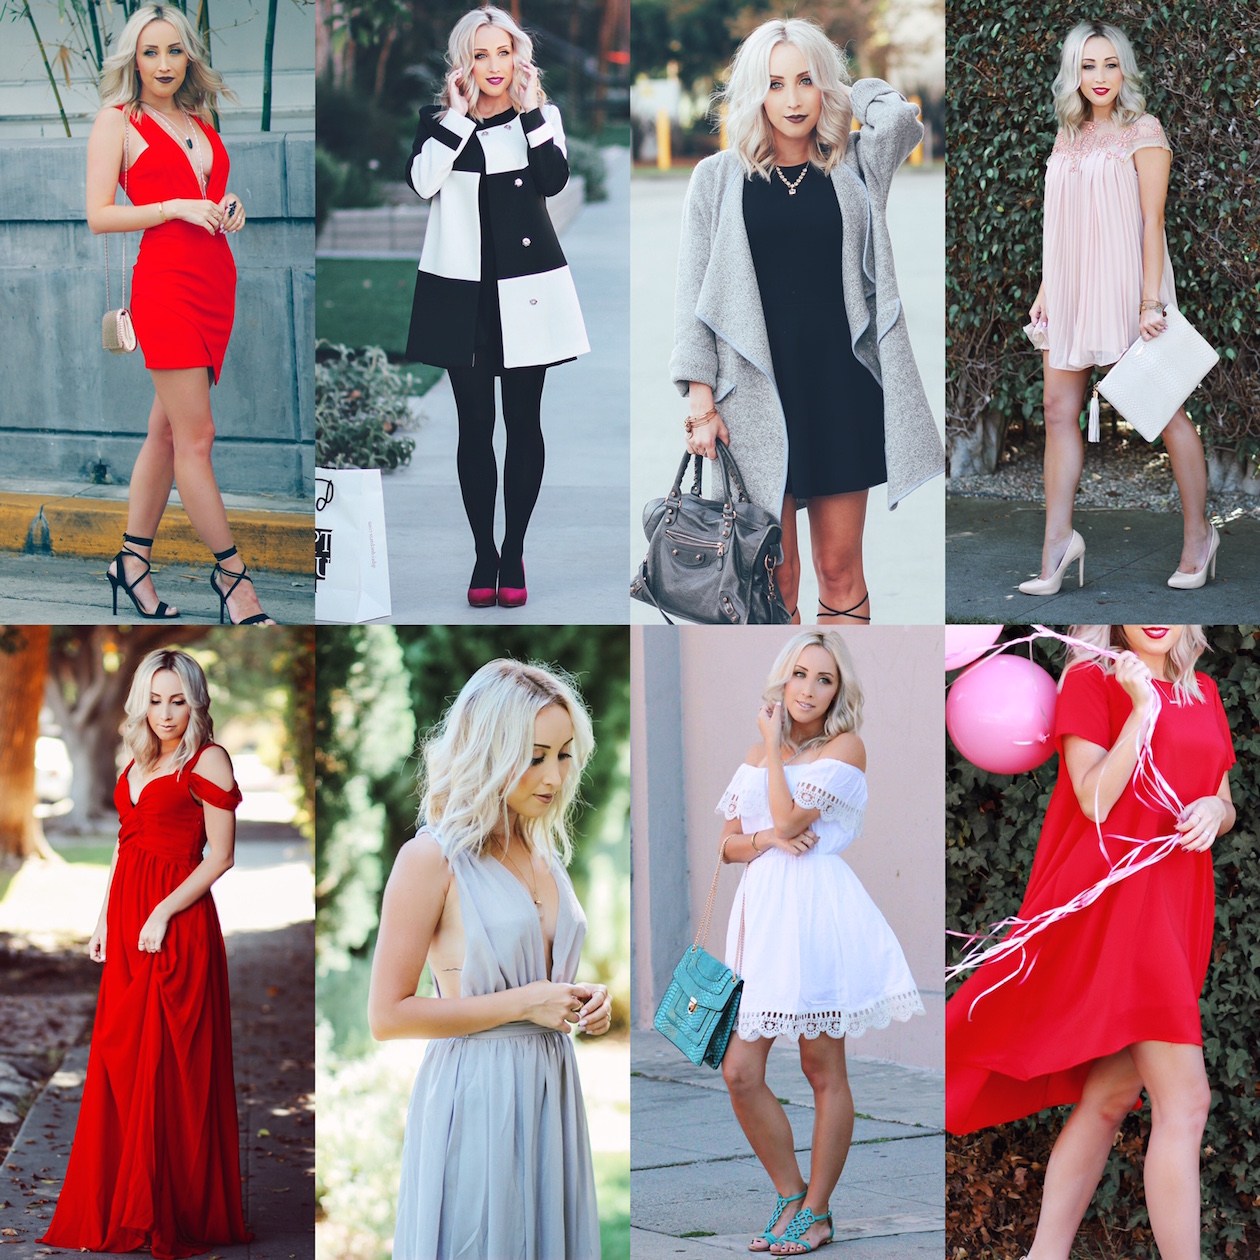 Shop the BIG Sale at SheInside from StyledByBlondie.com!